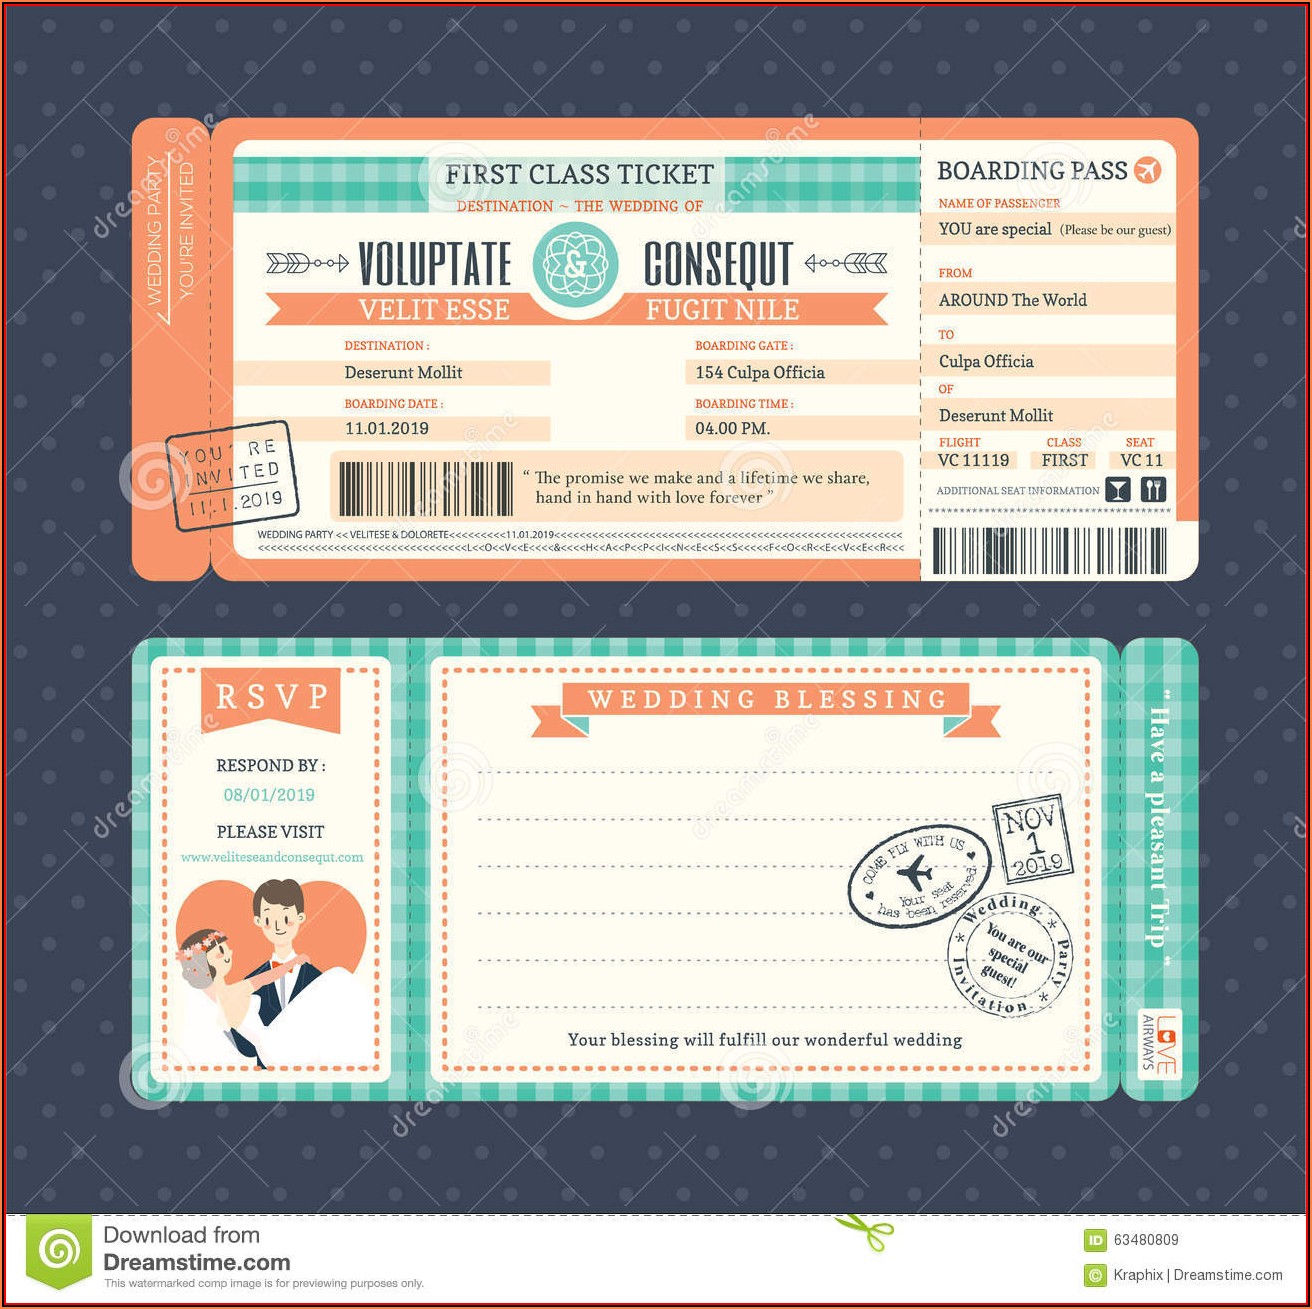 Boarding Pass Invitations Template Free Download